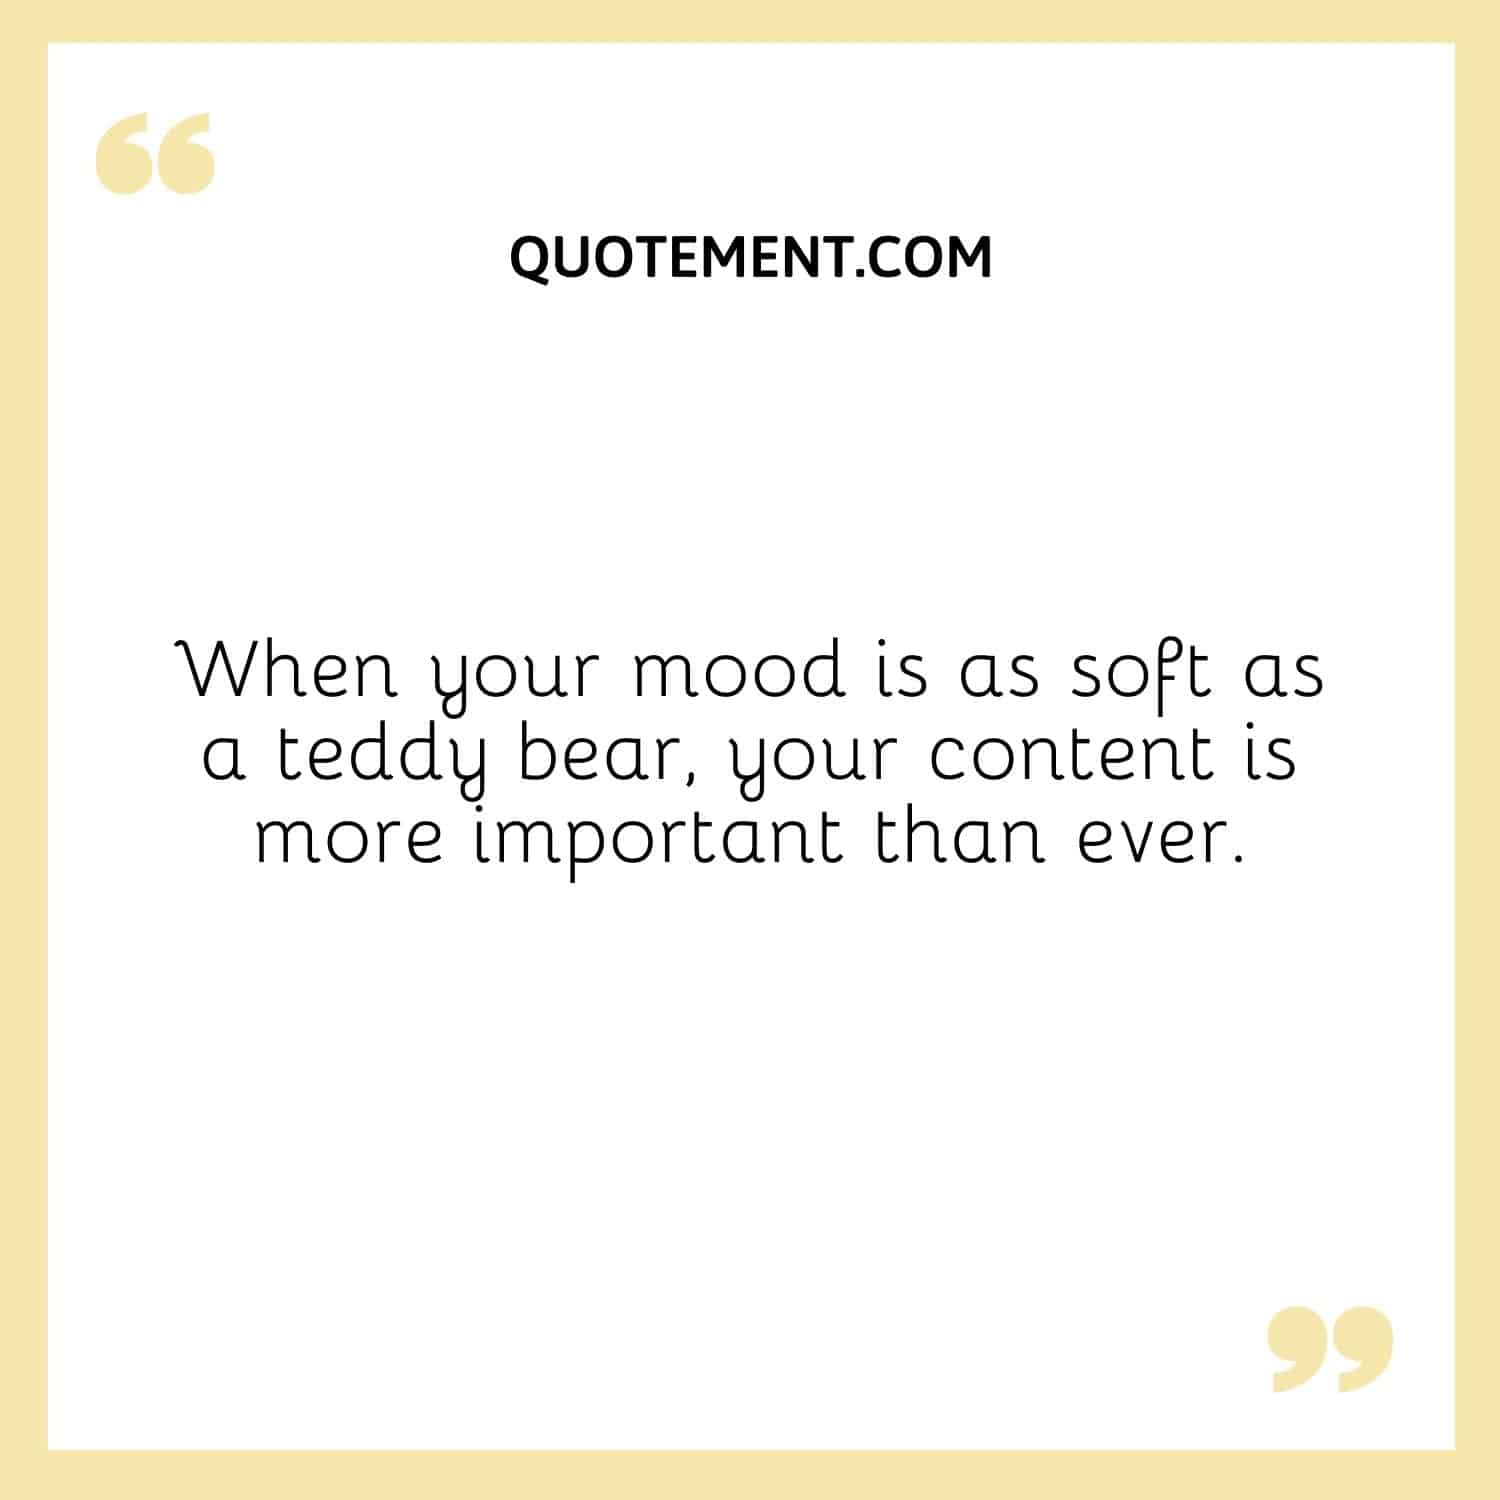 your content is more important than ever